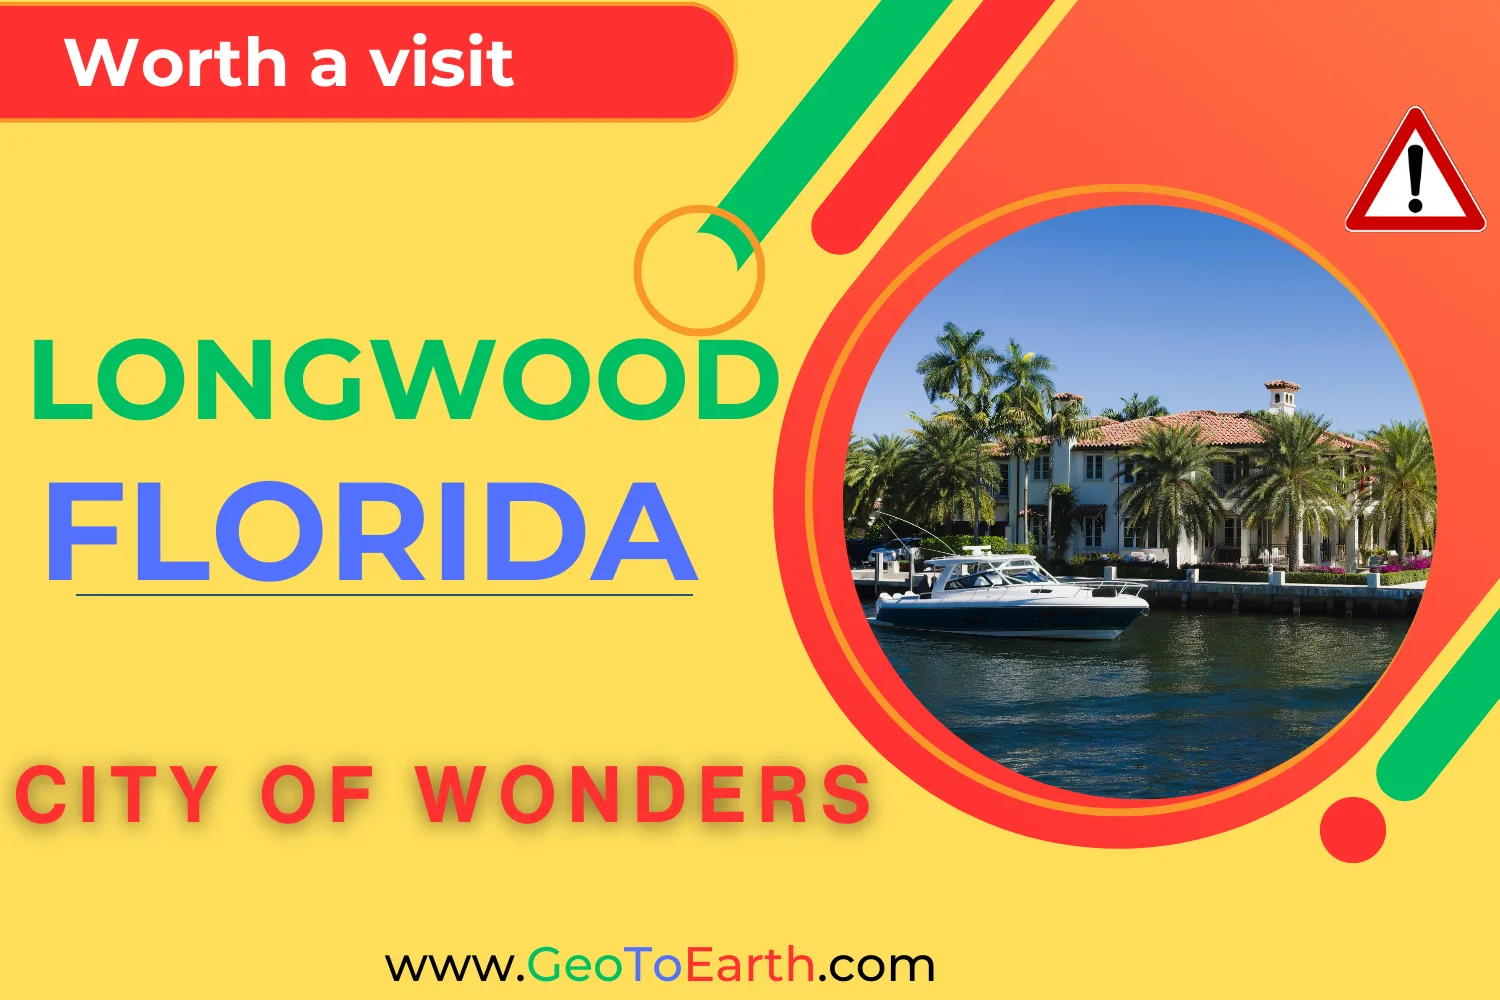 Longwood Florida |Experience Enchanting Charming 5 Features of the Area |